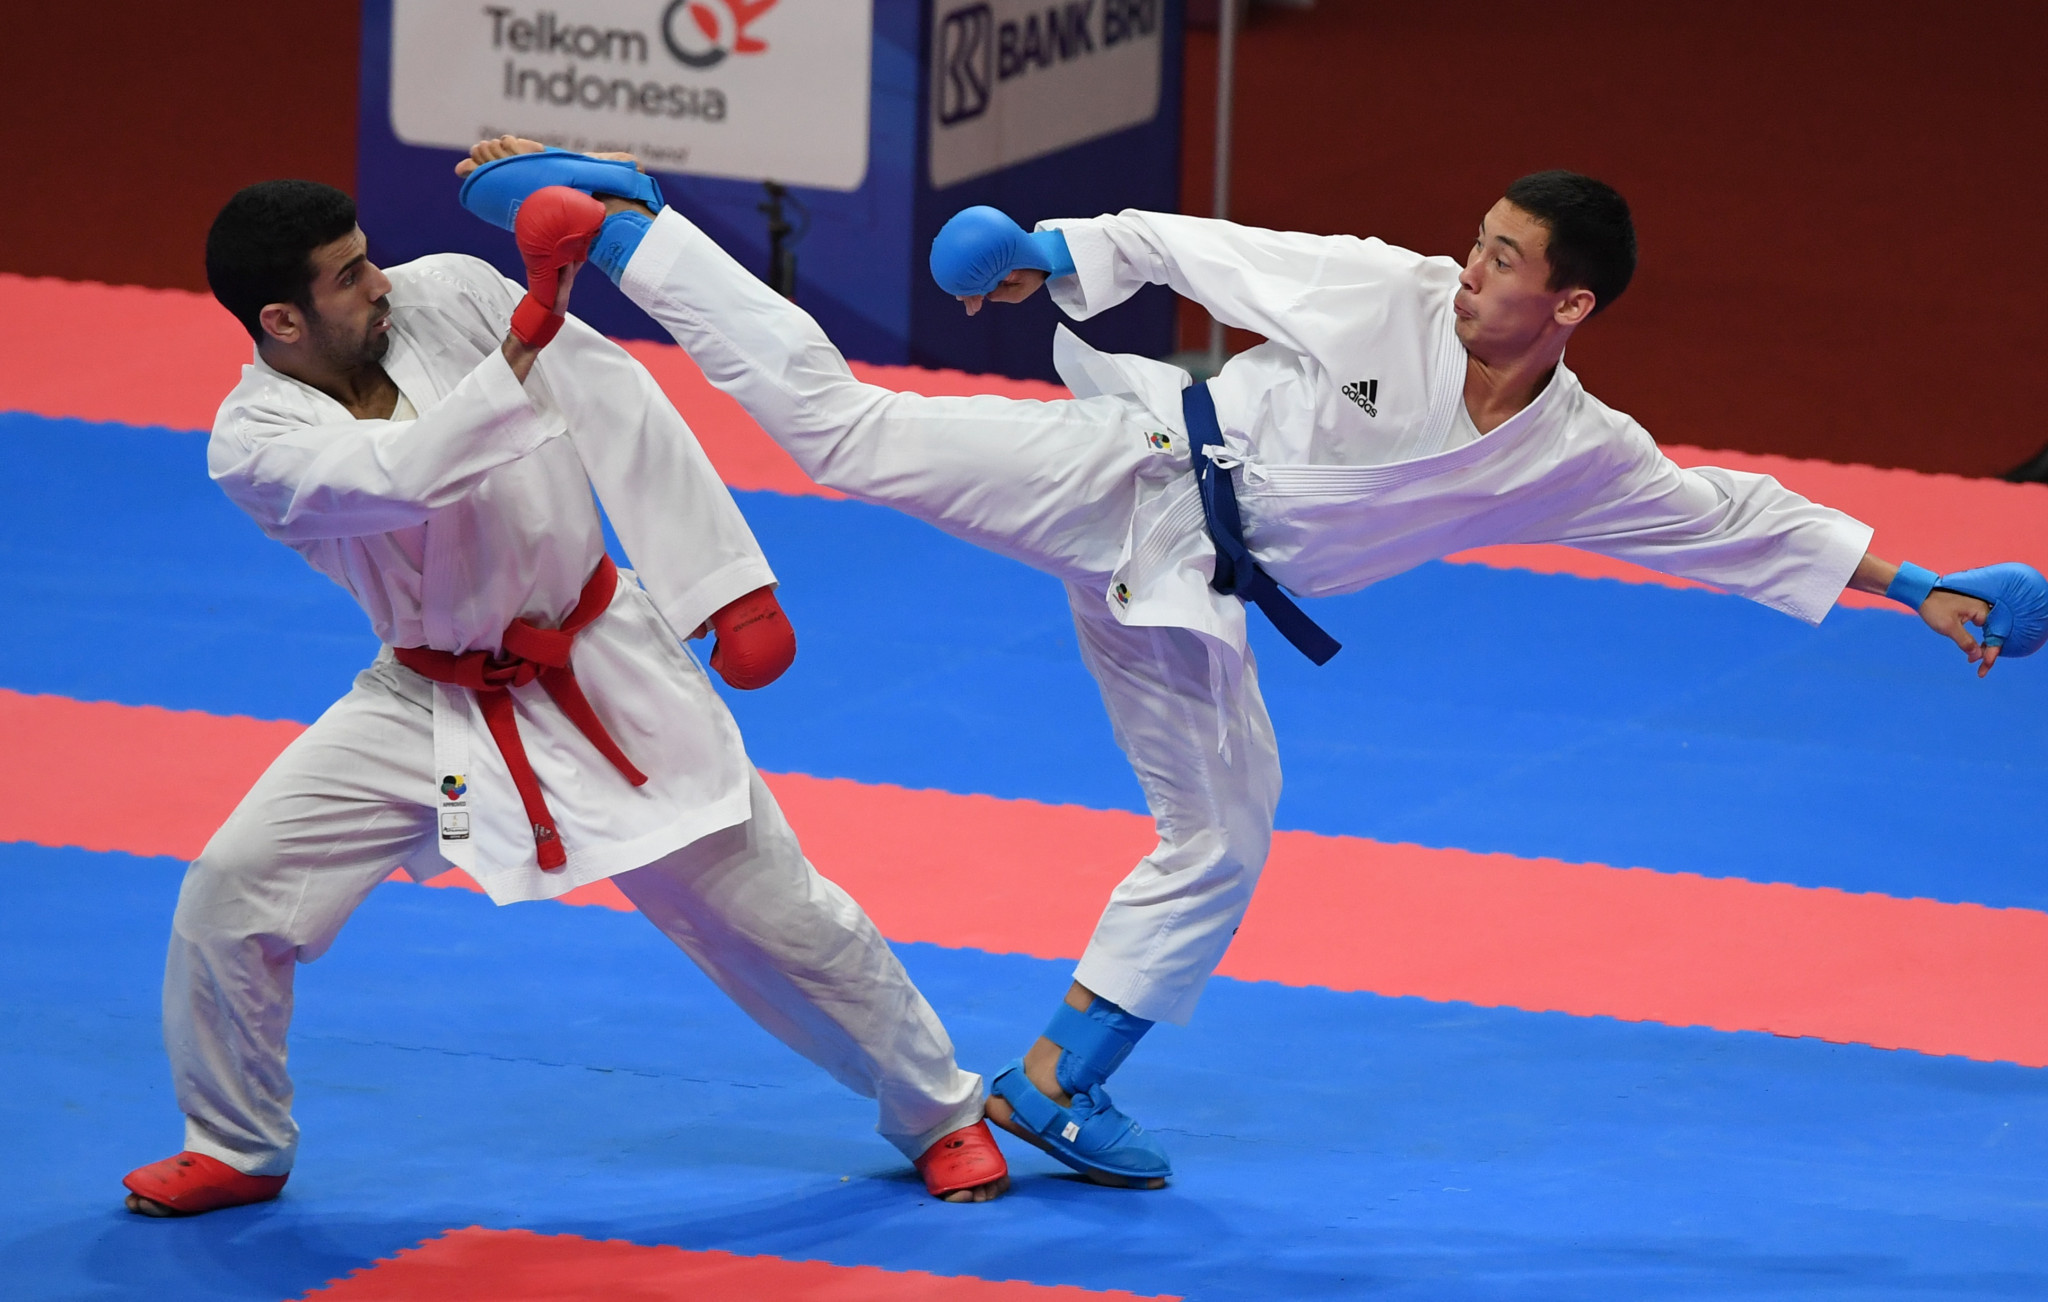 Kazakhstan's Didar Amirali, right, claimed the bronze medal in the men's under-67kg event at the Asian Karate Championships in Tashkent ©Getty Images